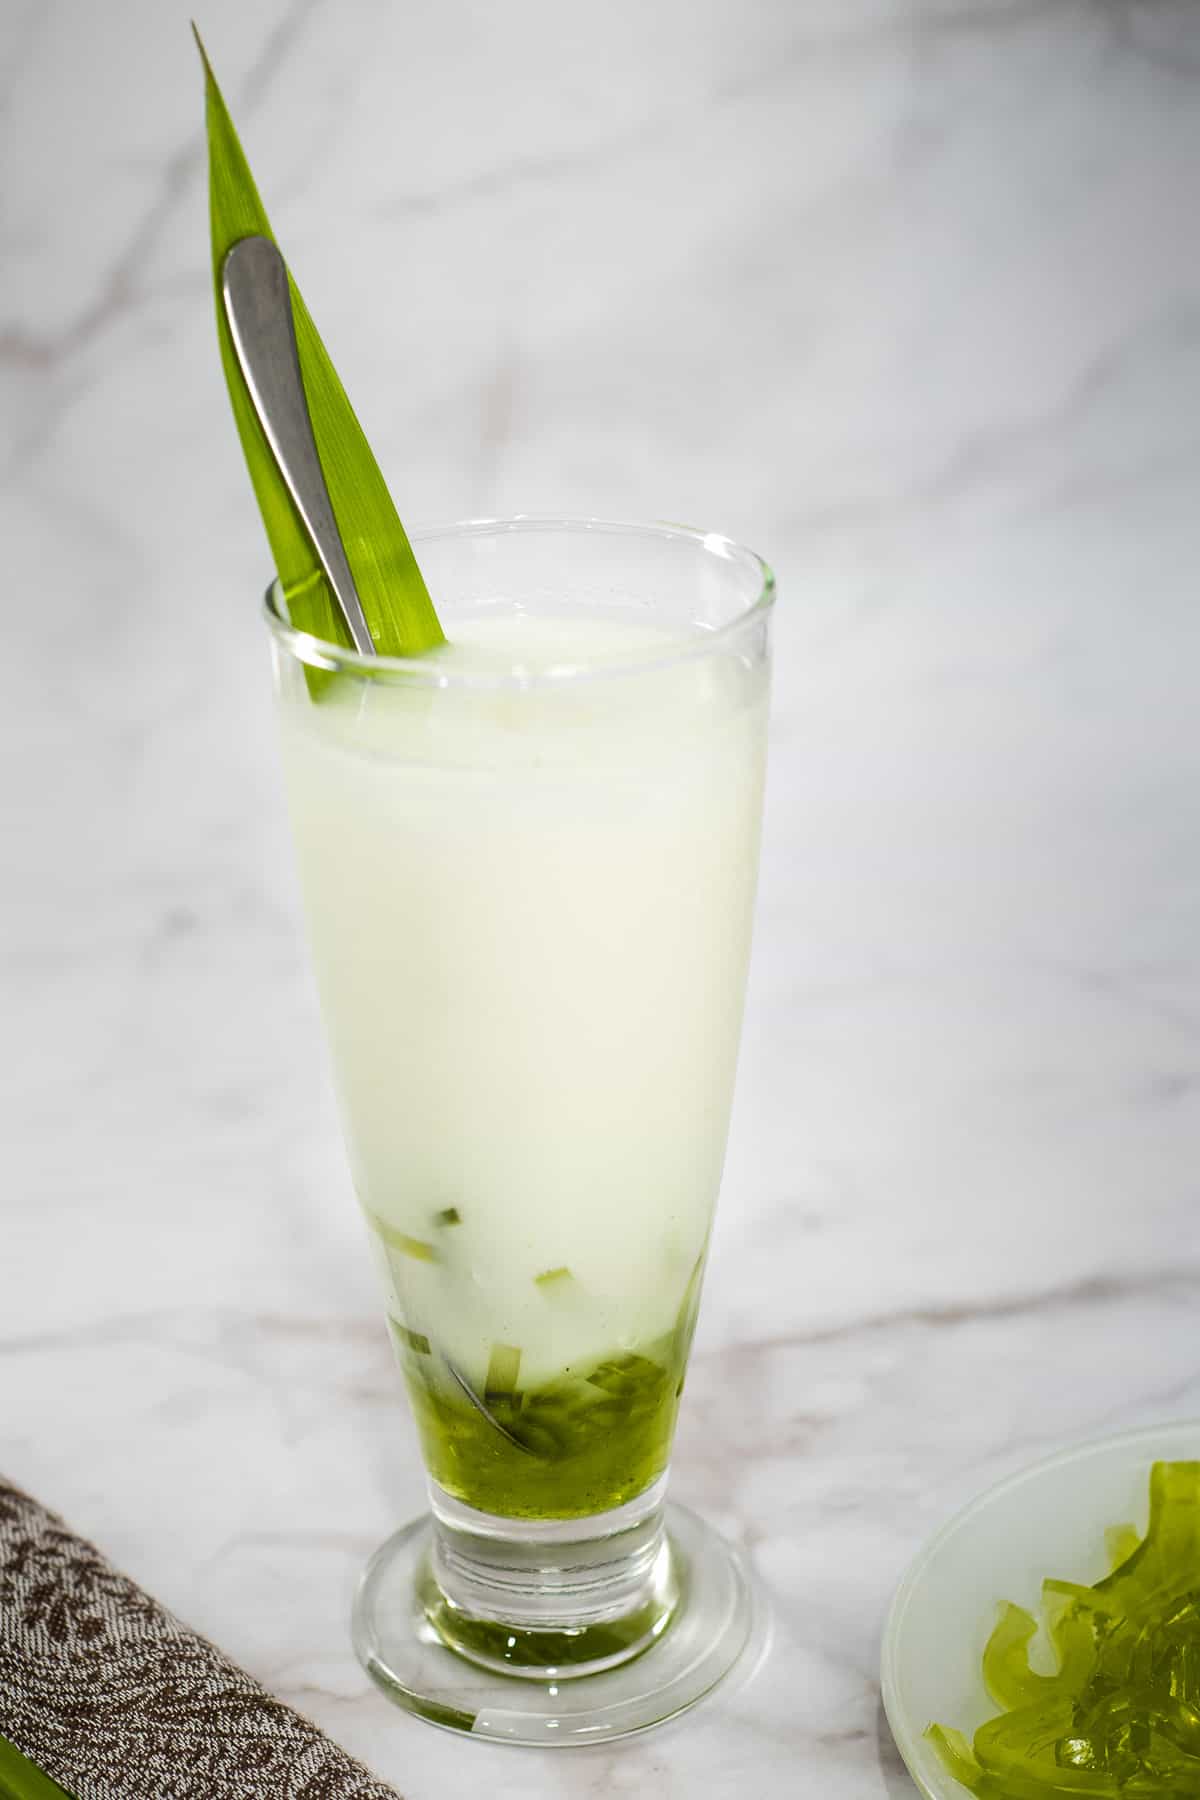 A tall glass of milk with green jelly boba strips.